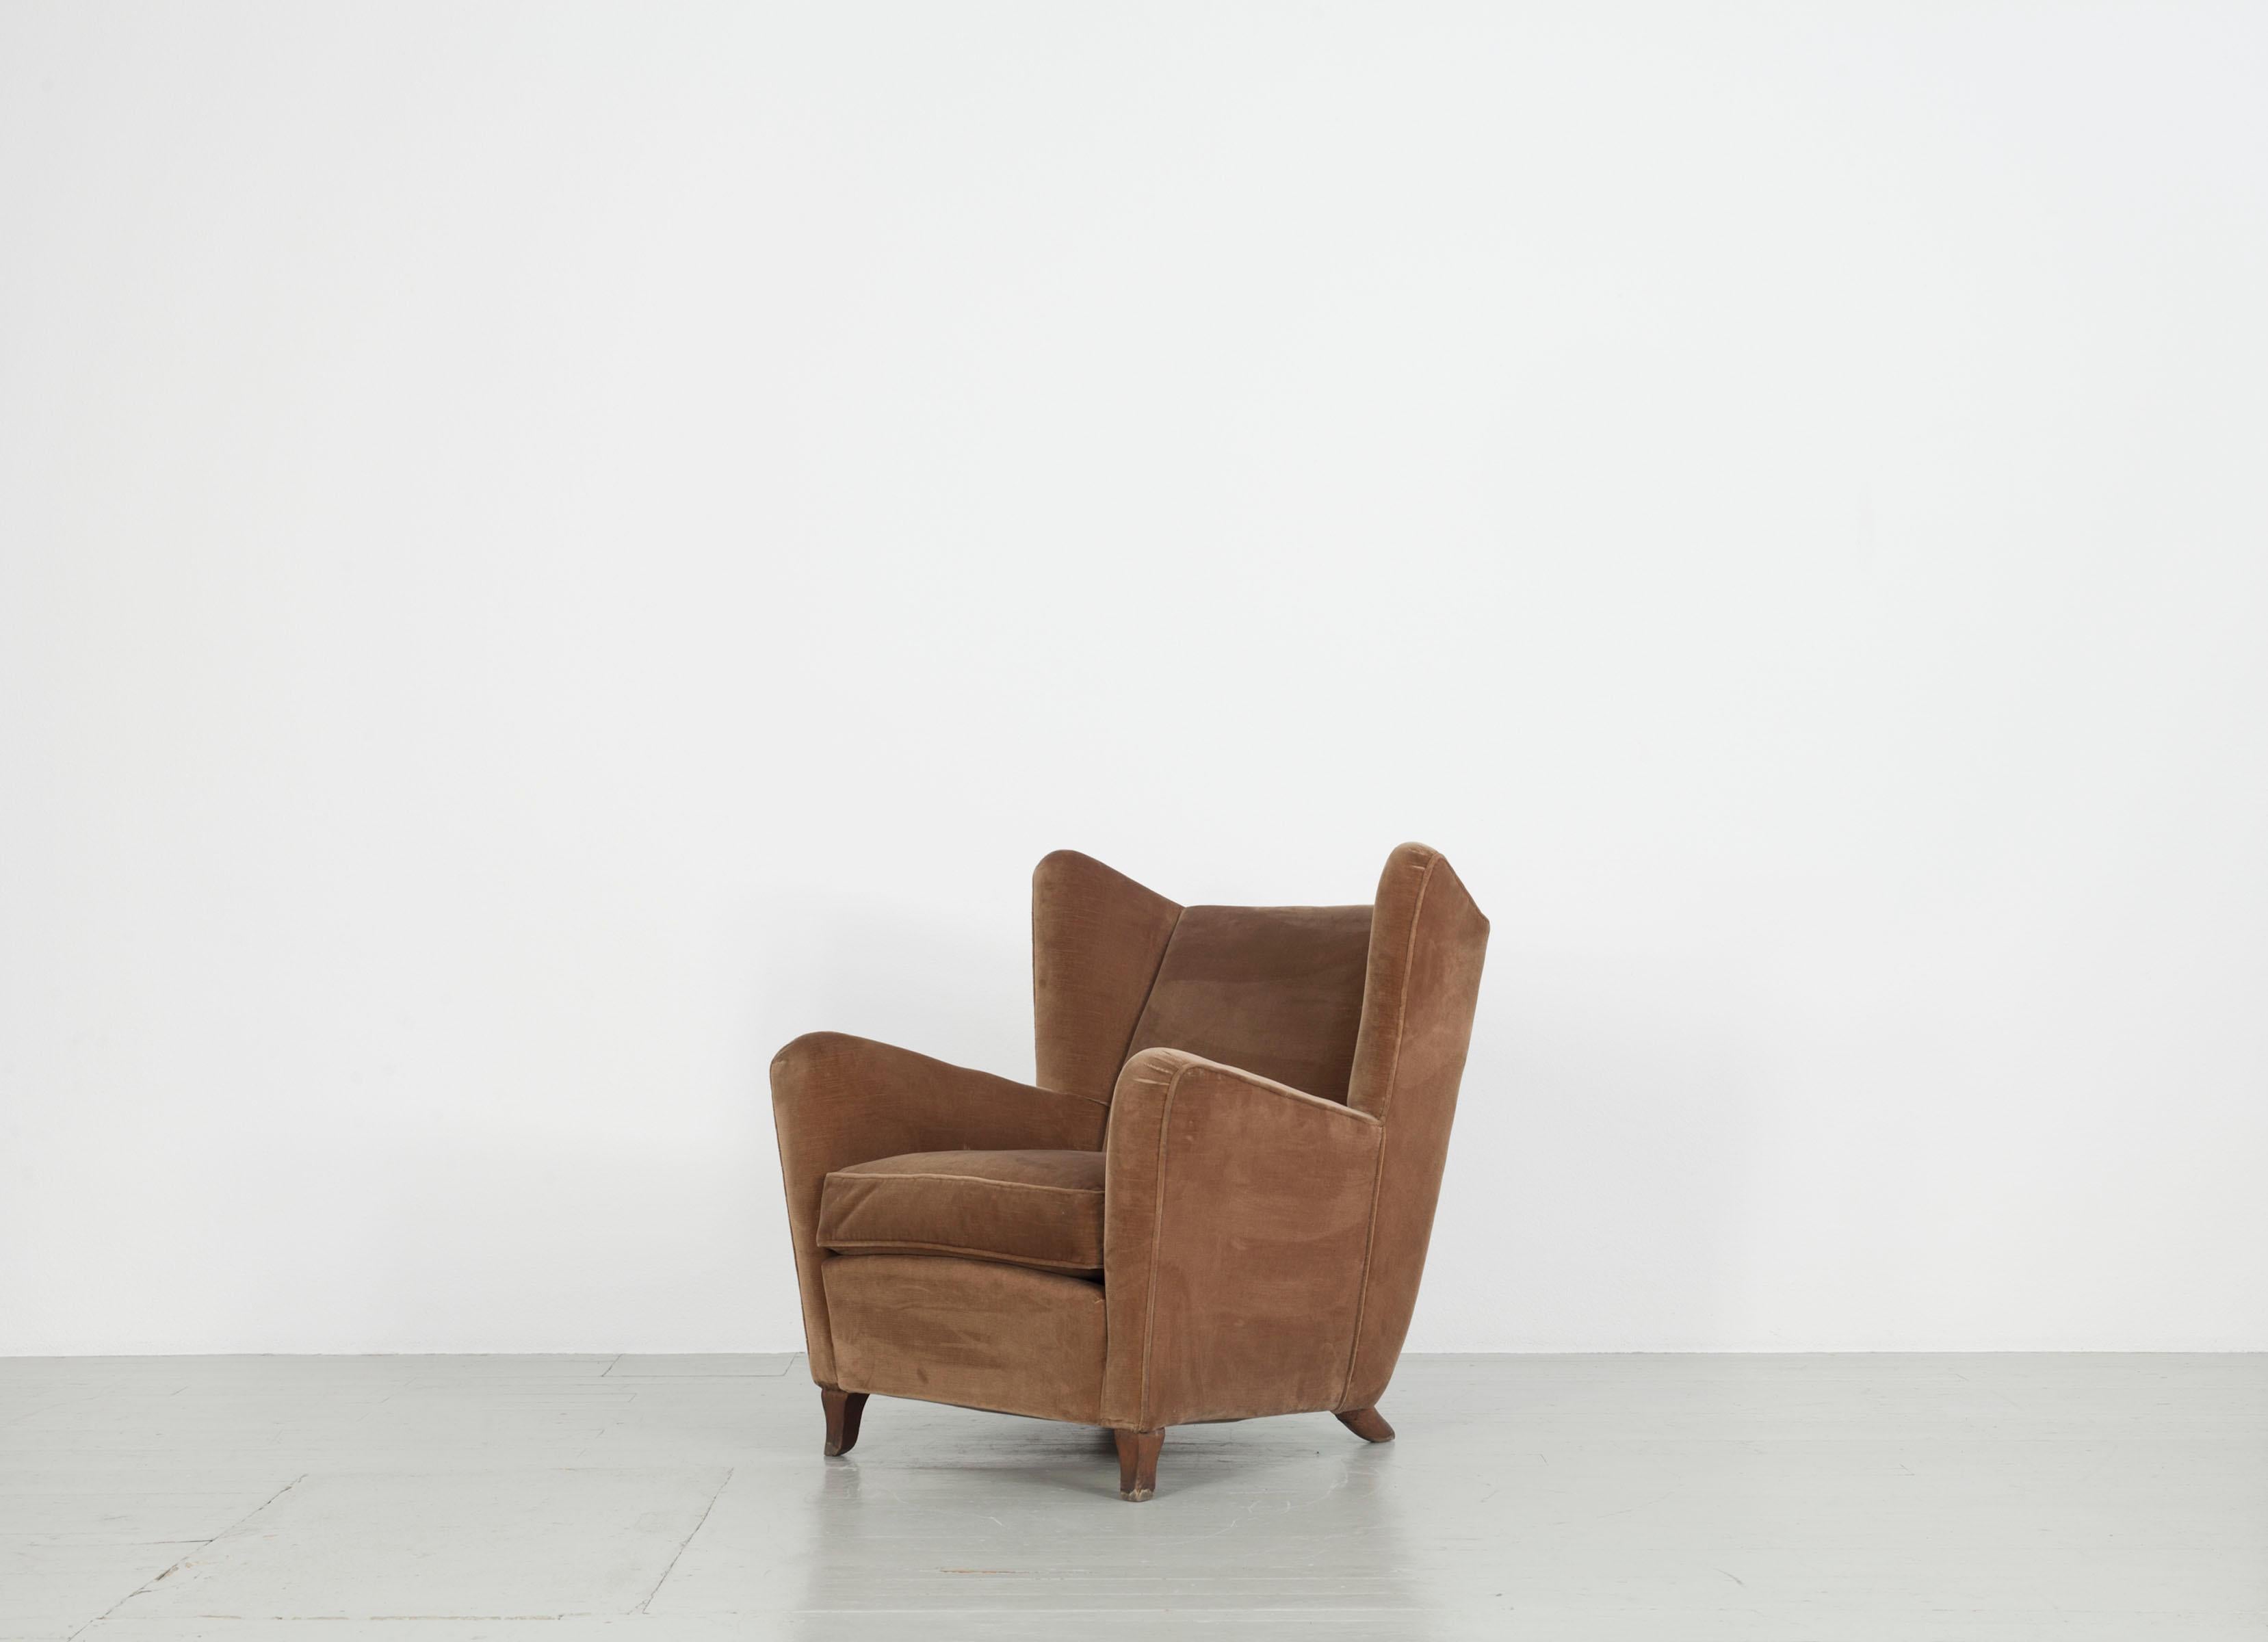 Mid-20th Century Set of Three Velvet Armchair, Melchiorre Bega Attributed, Italy, 1950s For Sale